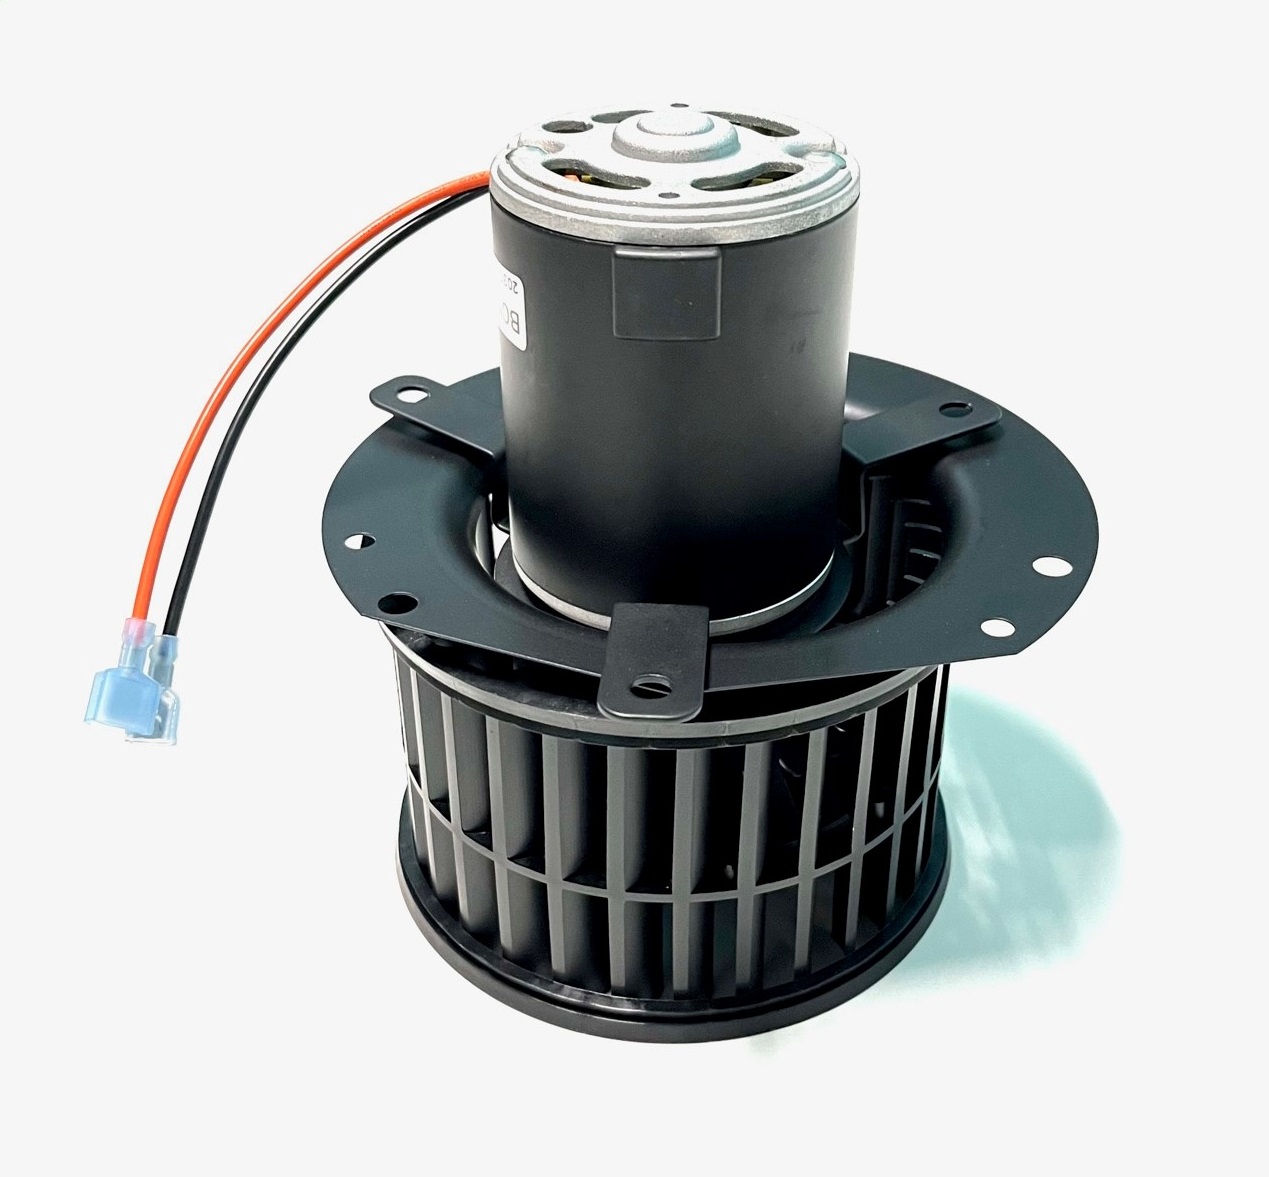 Blower Motor and Squirrel Cage Assembly, IC Drivers & Defrost